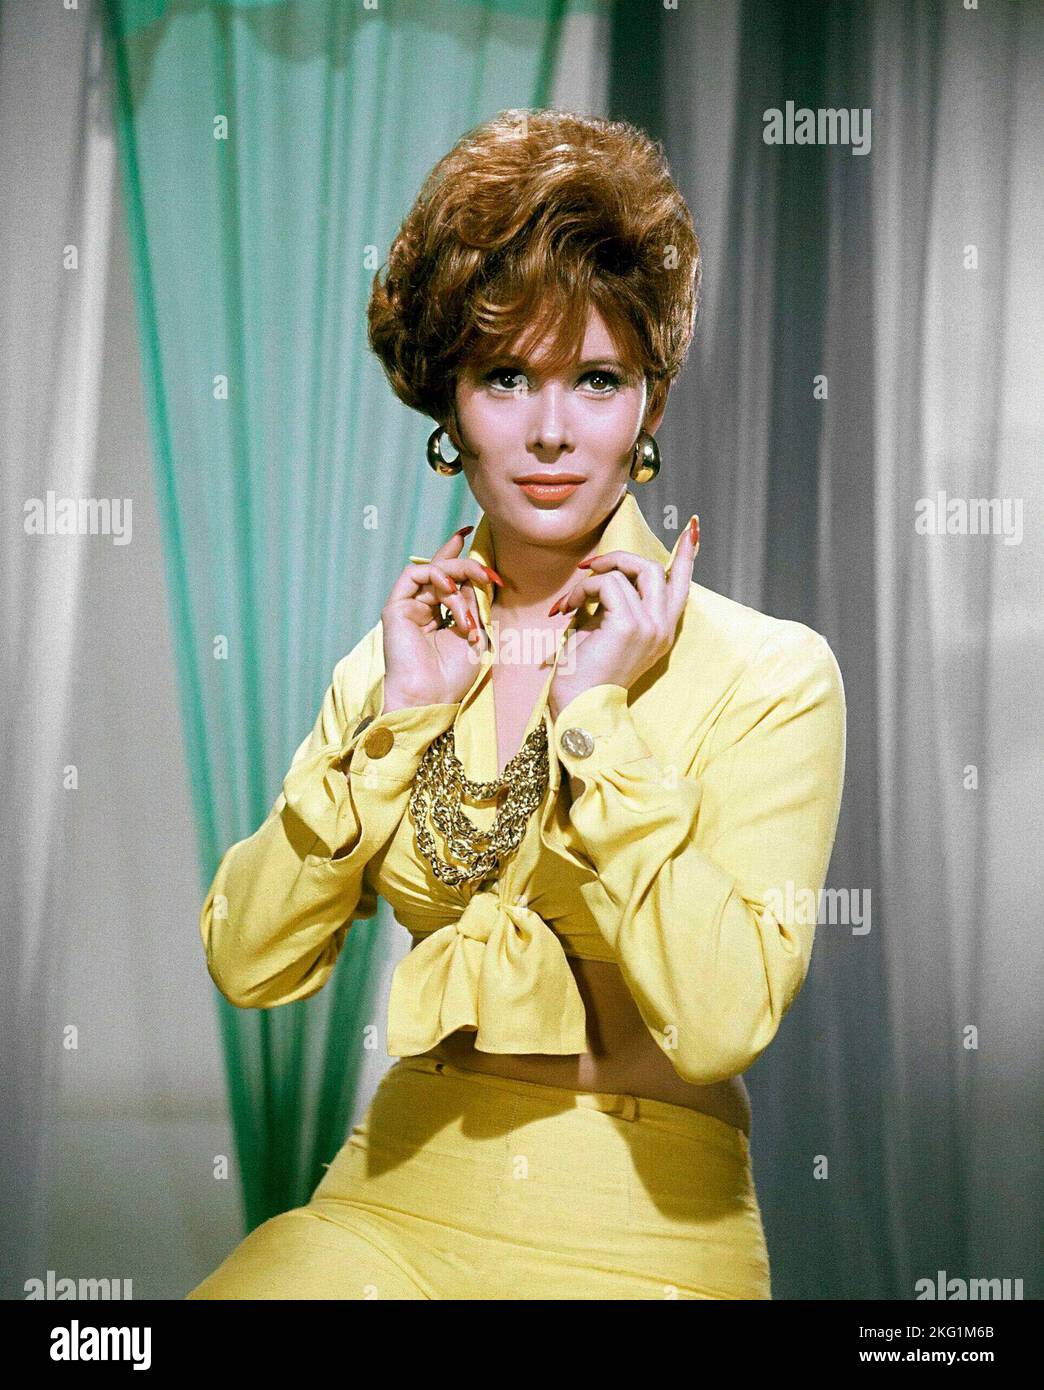 JILL ST. JOHN in WHO'S BEEN SLEEPING IN MY BED? (1963), directed by DANIEL MANN. Credit: PARAMOUNT PICTURES / Album Stock Photo